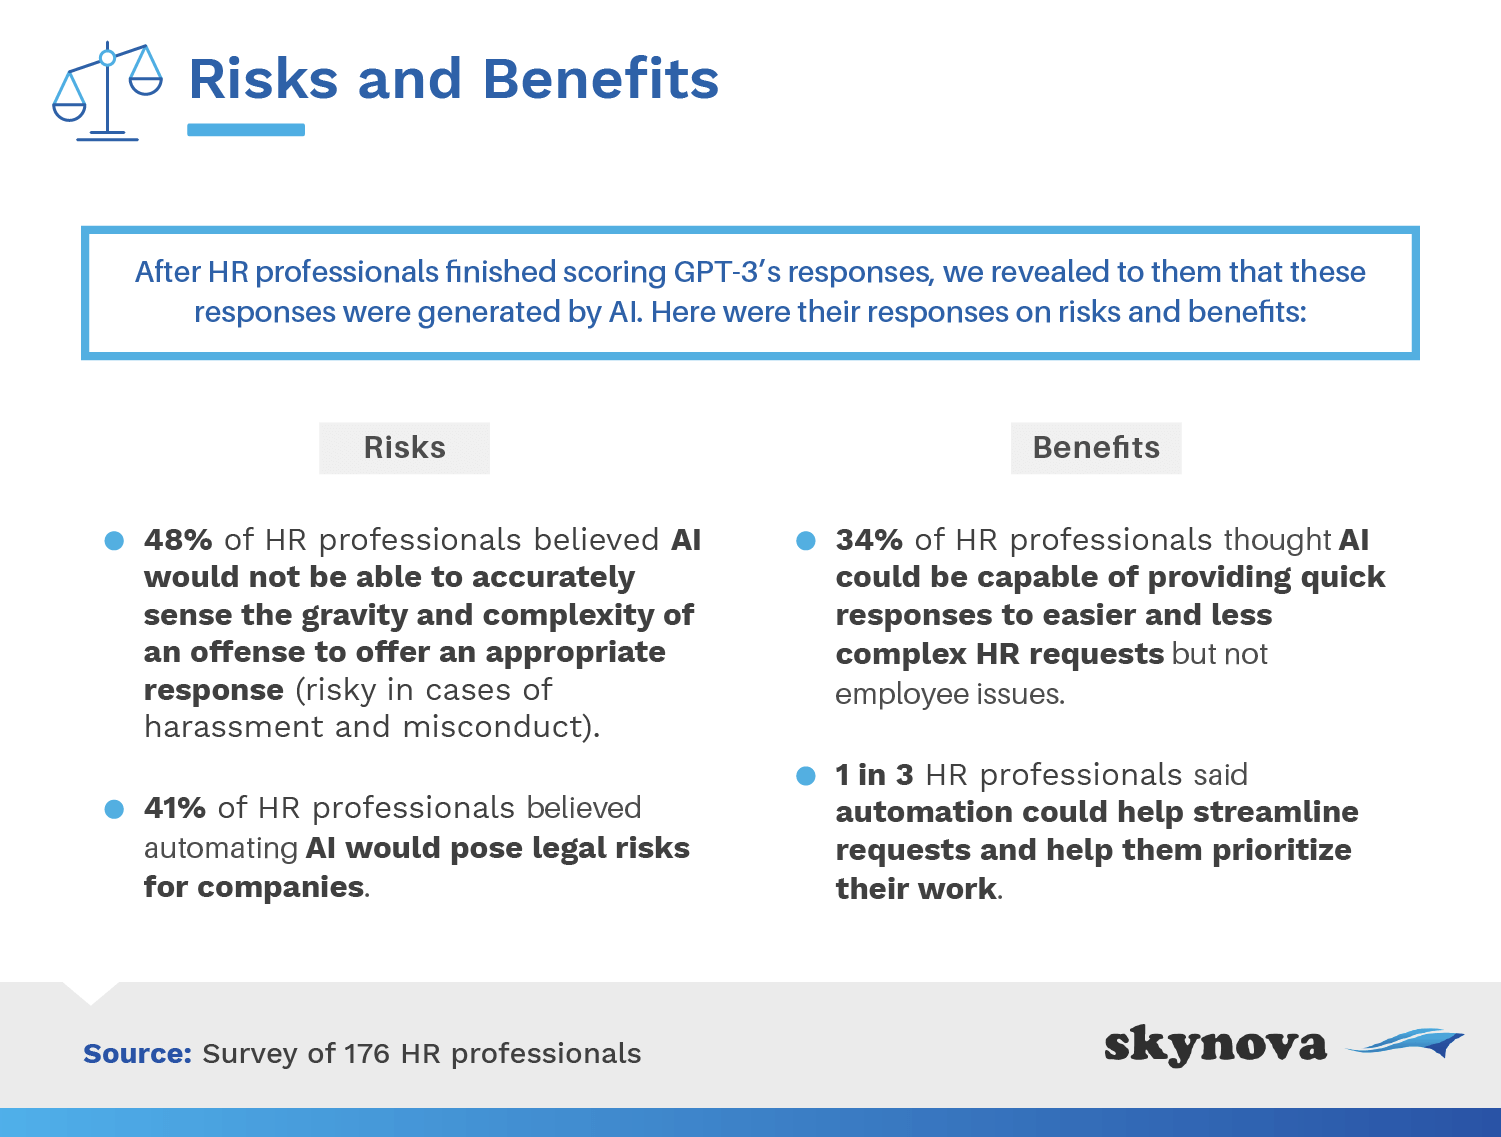 Risks and Benefits